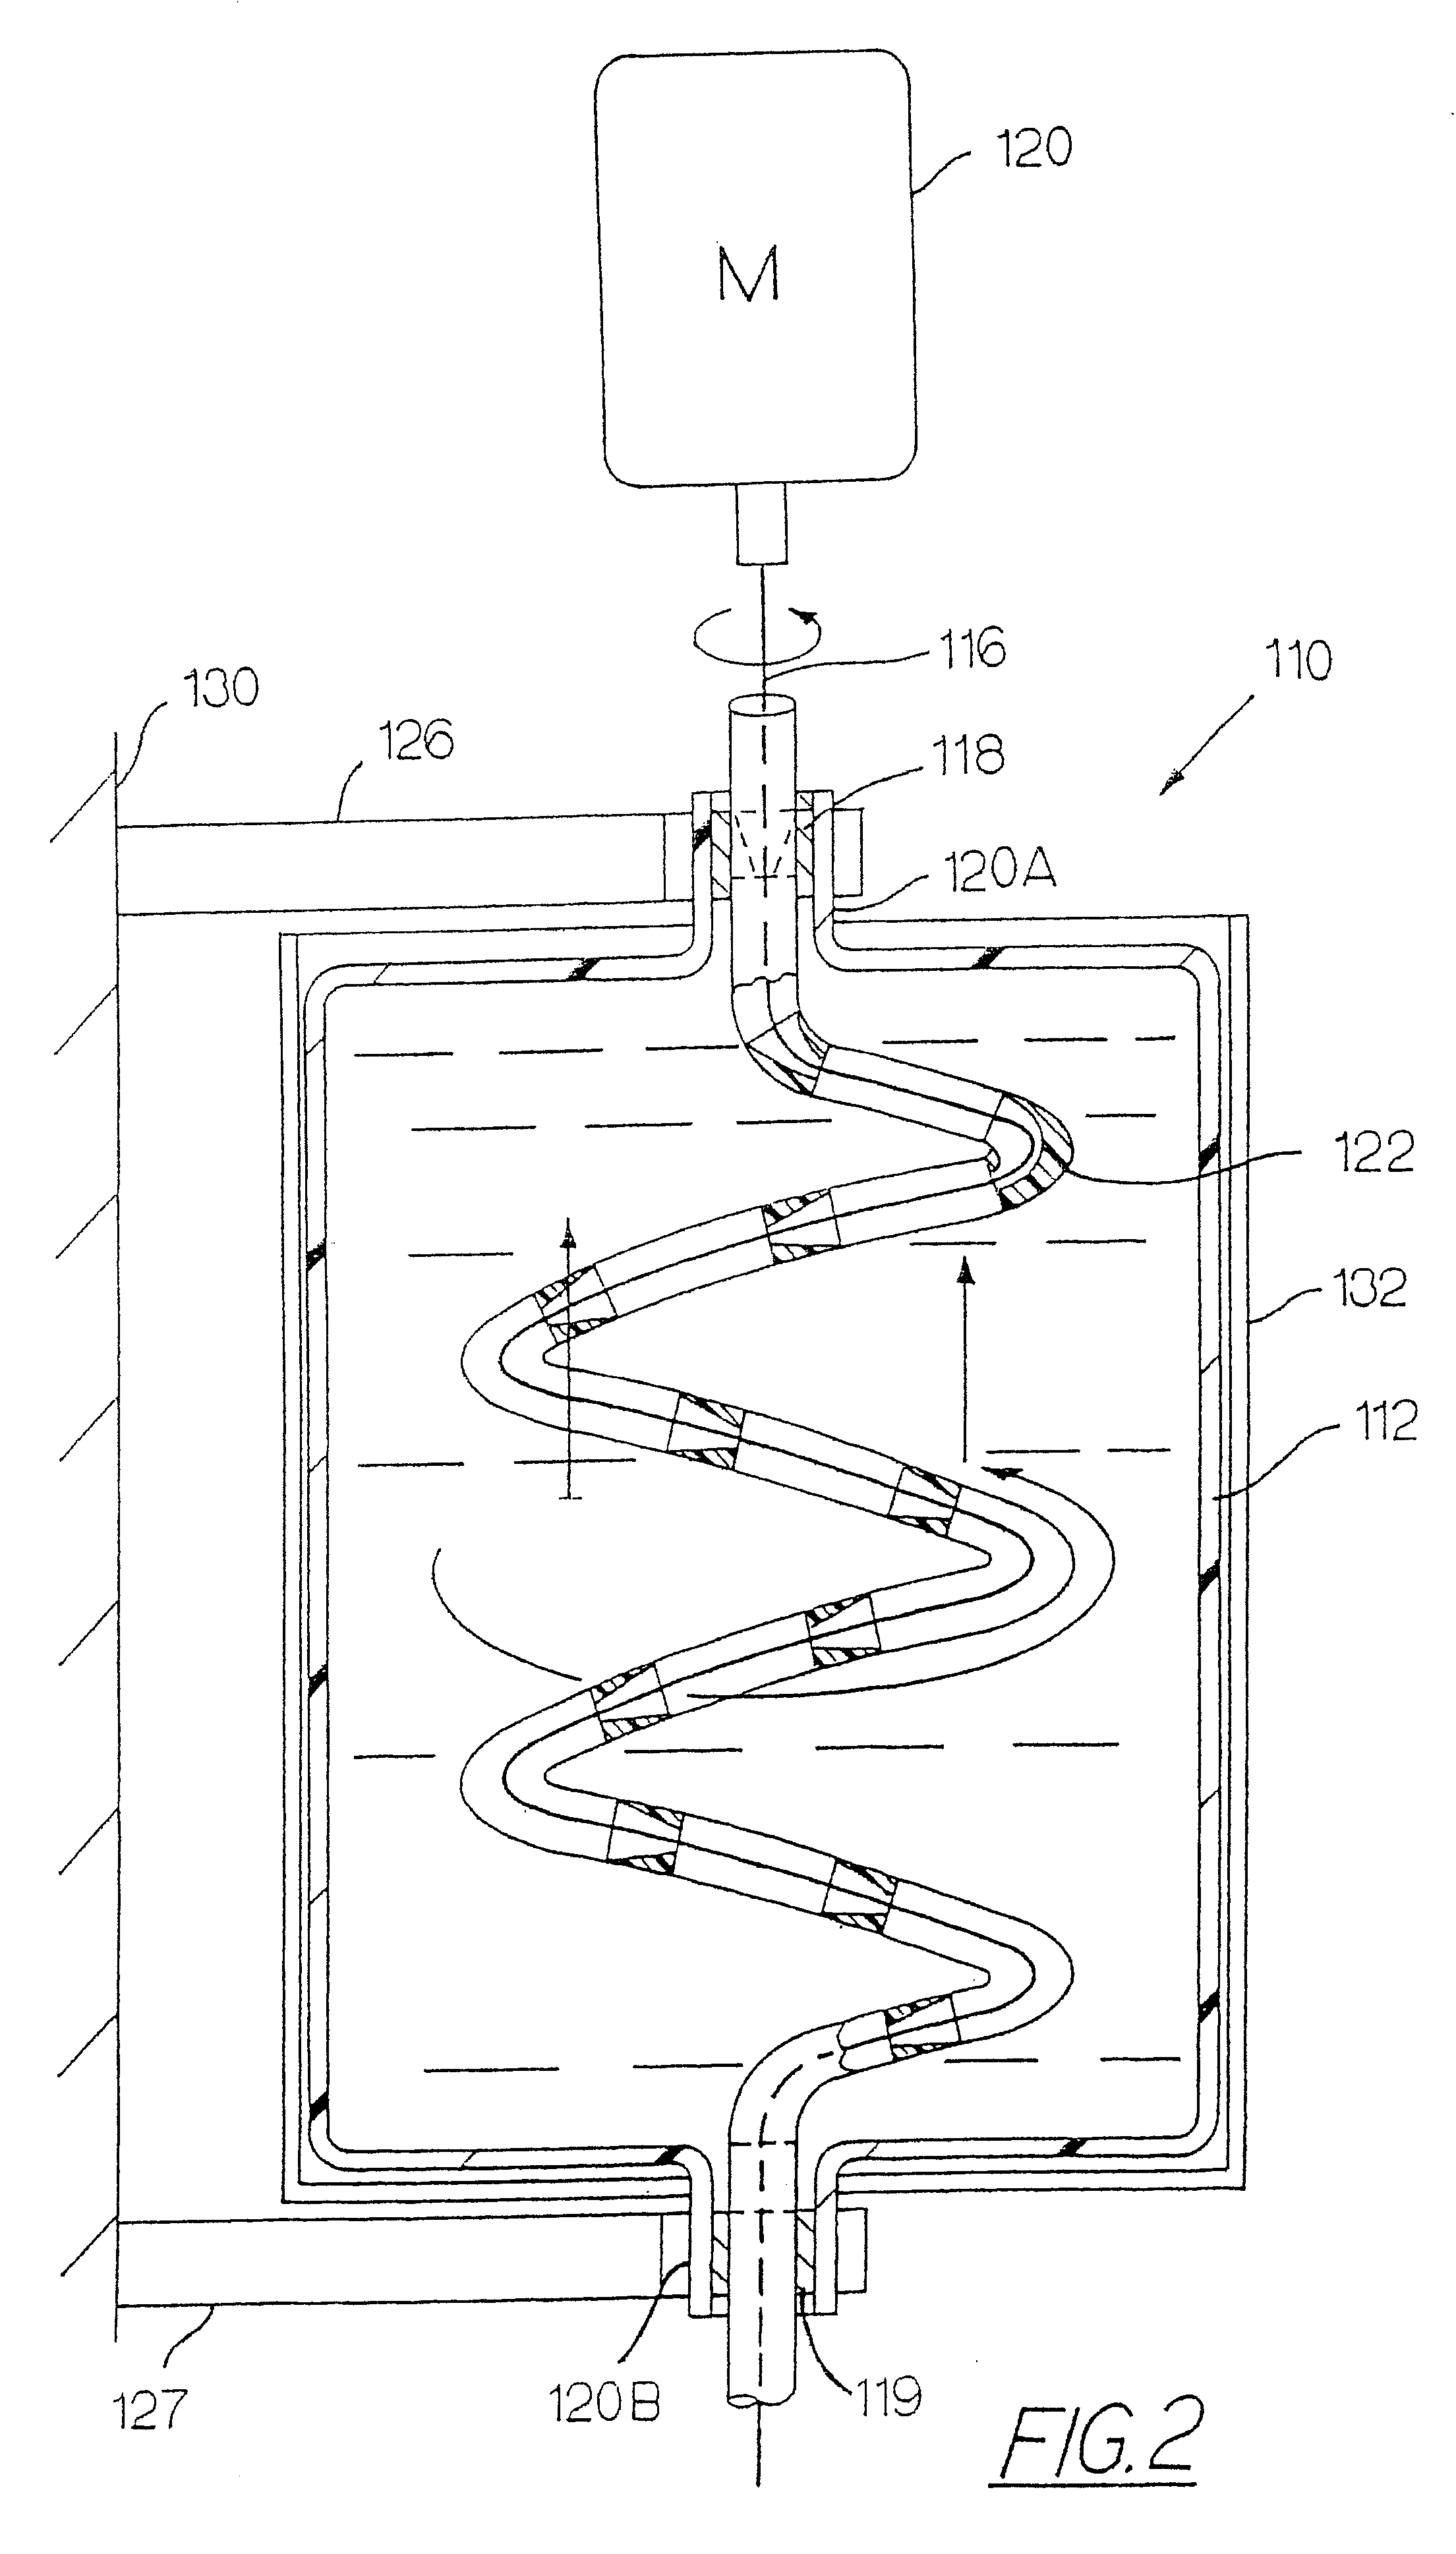 Apparatus and method for mixing materials sealed in a container under sterile conditions